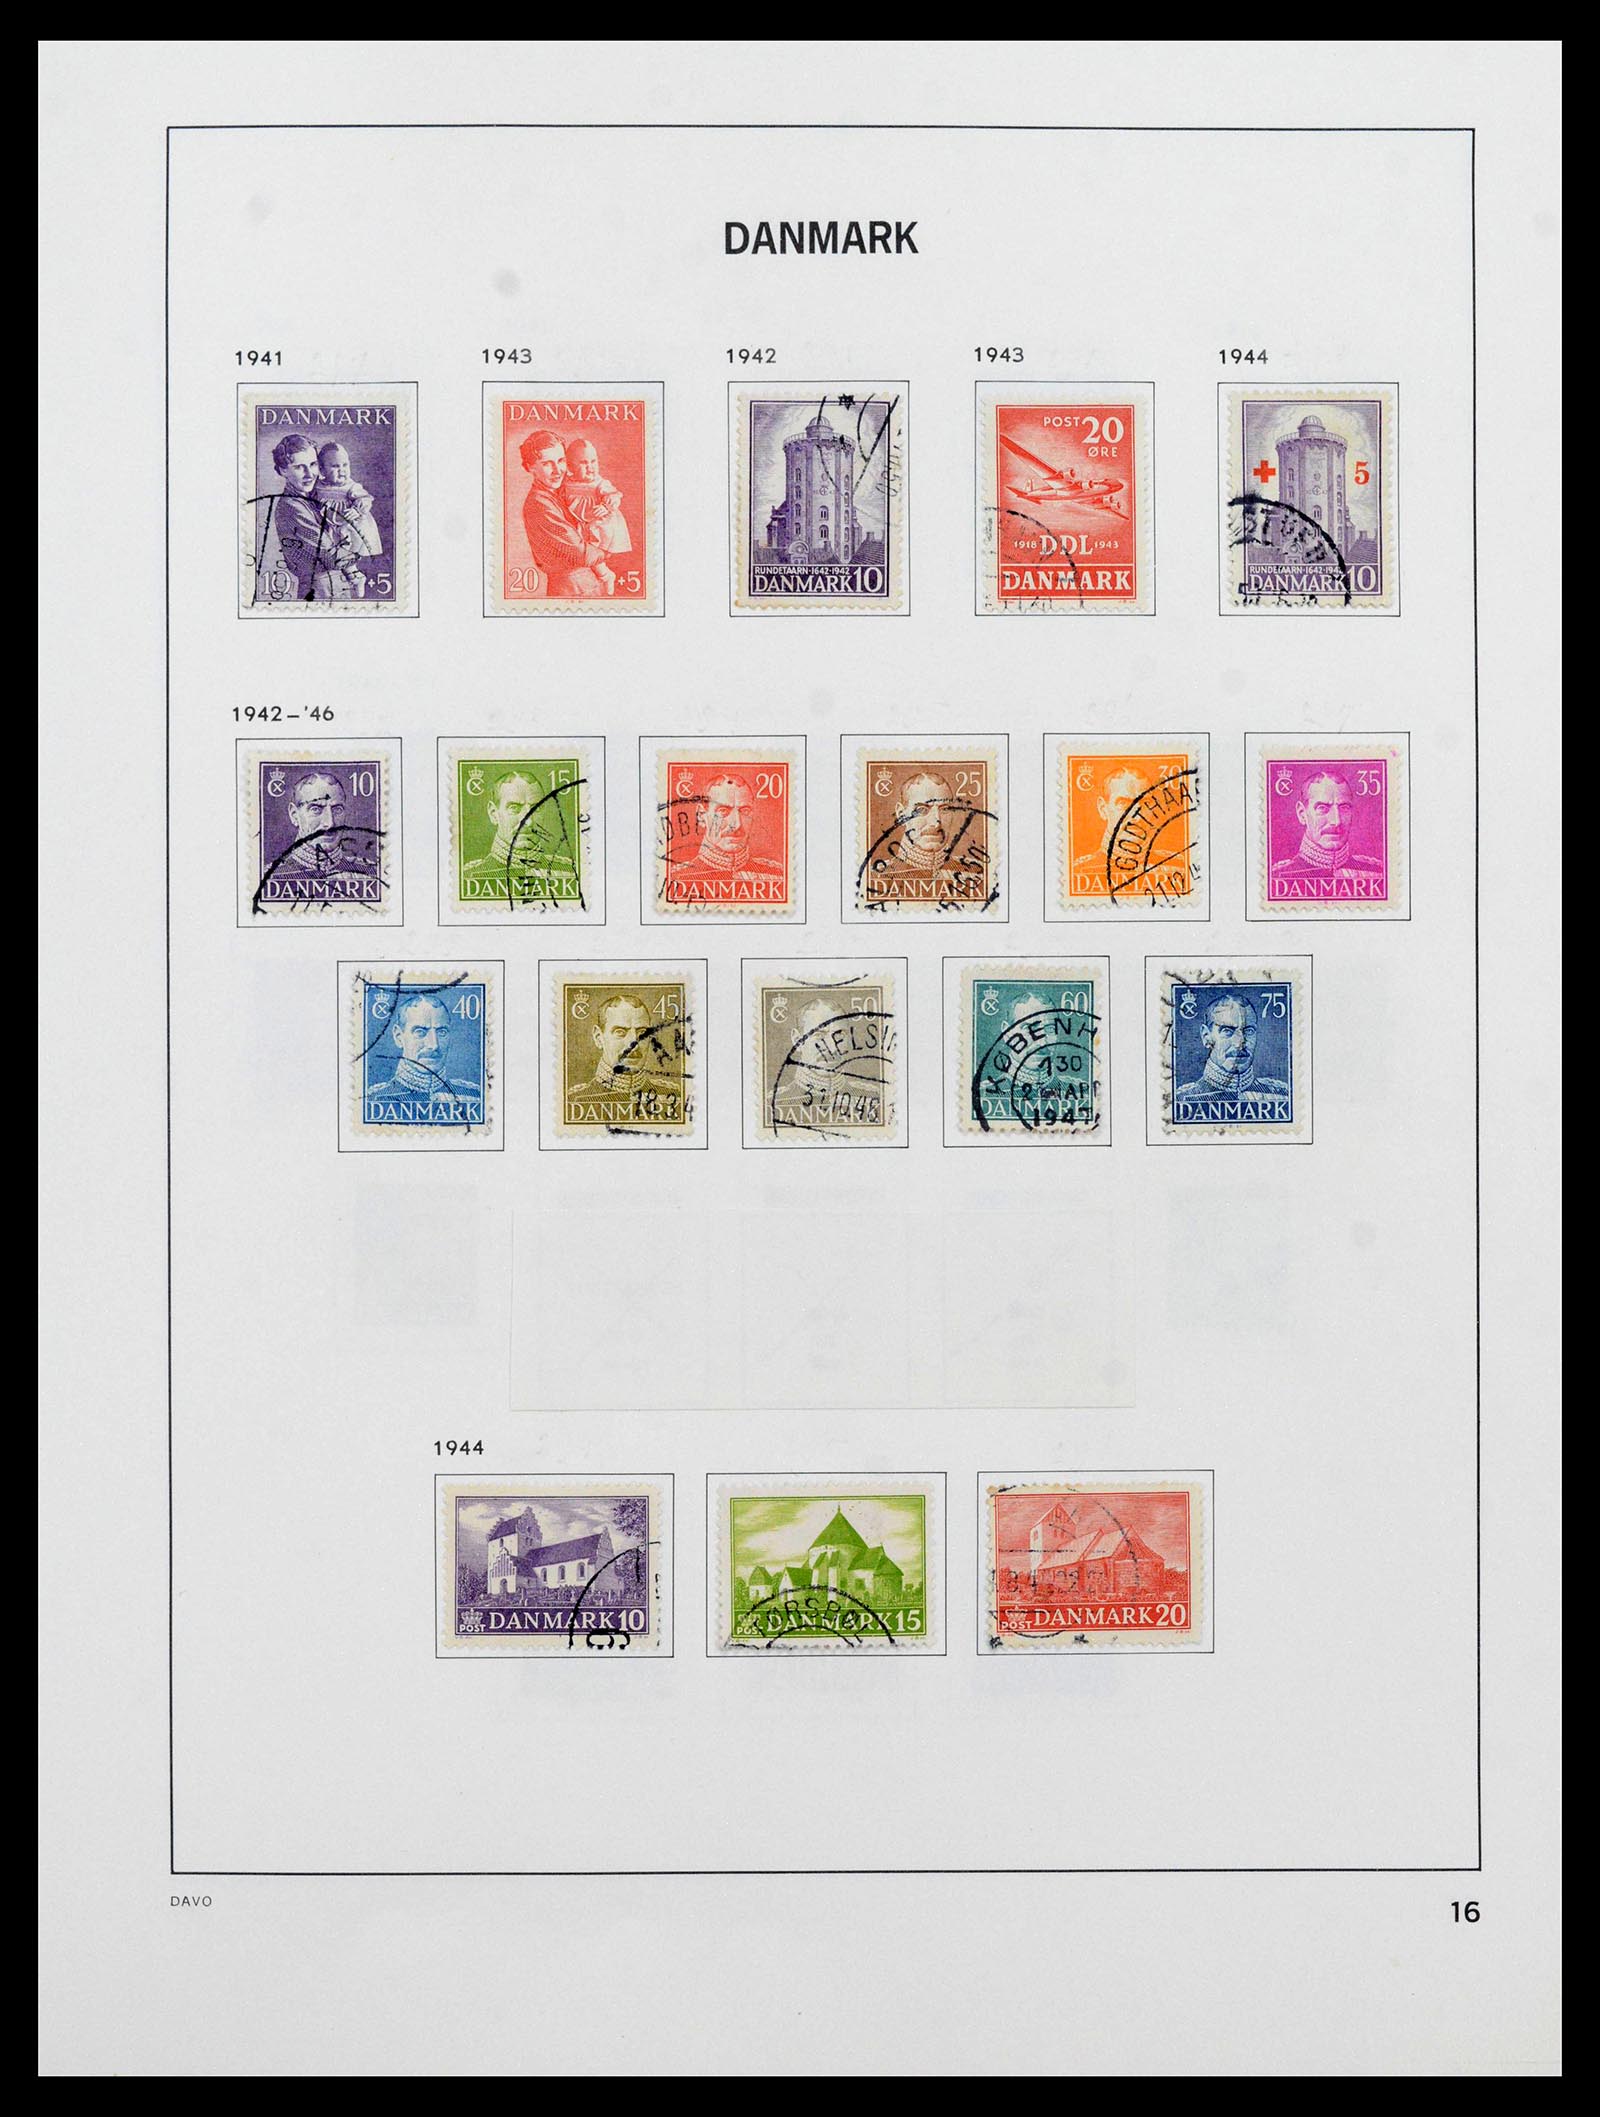 39428 0018 - Stamp collection 39428 Denmark 1851-2019.